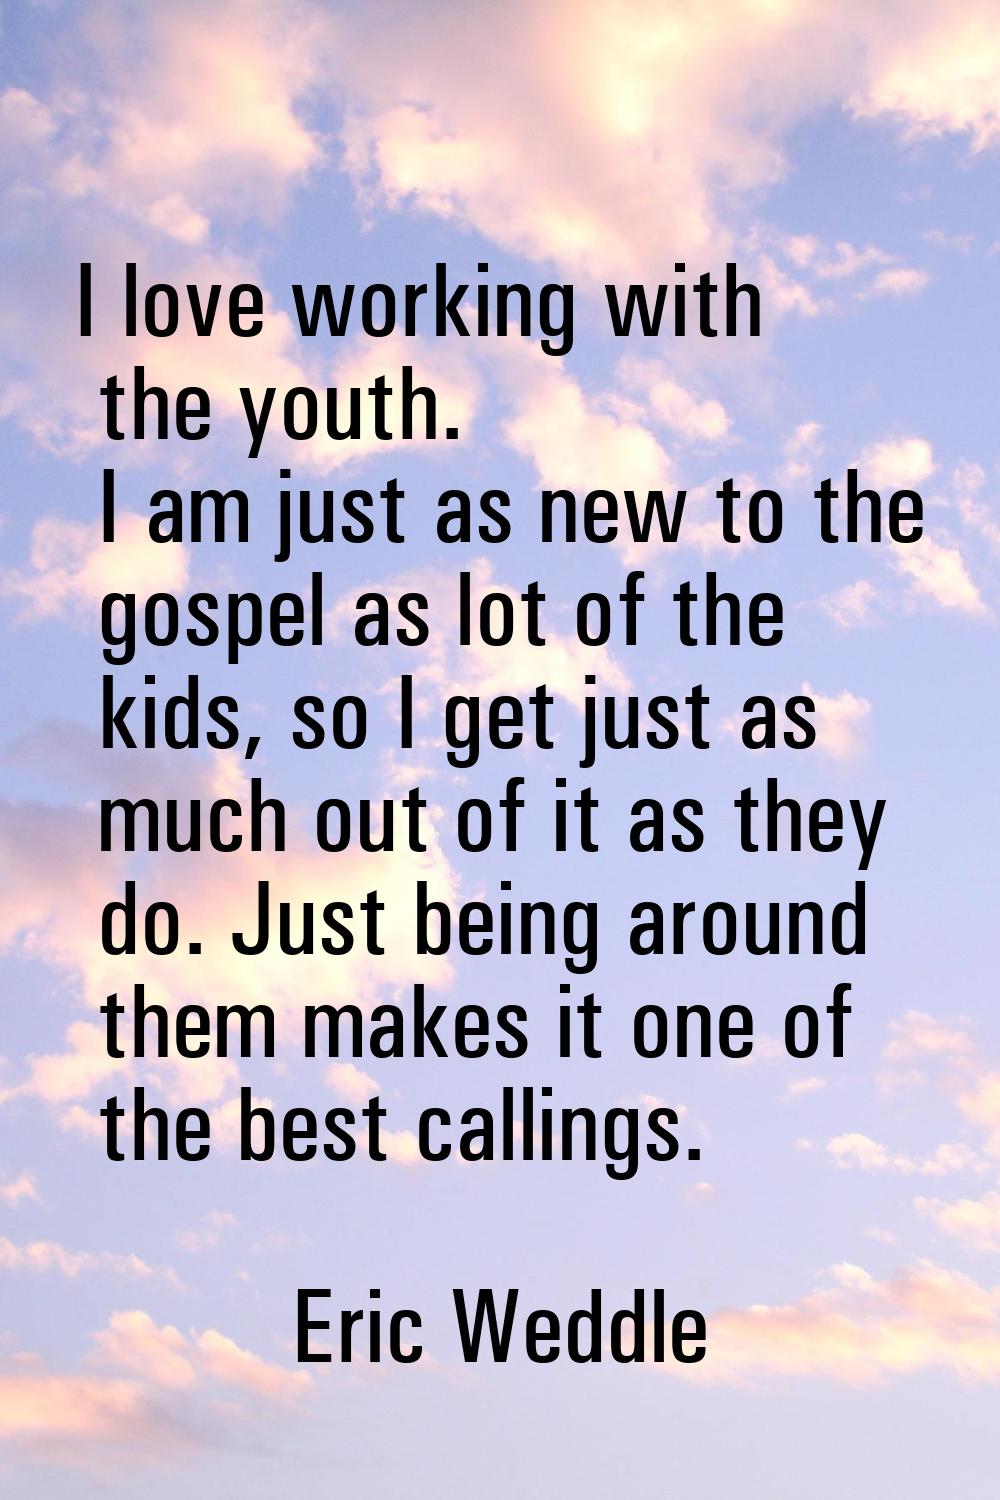 I love working with the youth. I am just as new to the gospel as lot of the kids, so I get just as 